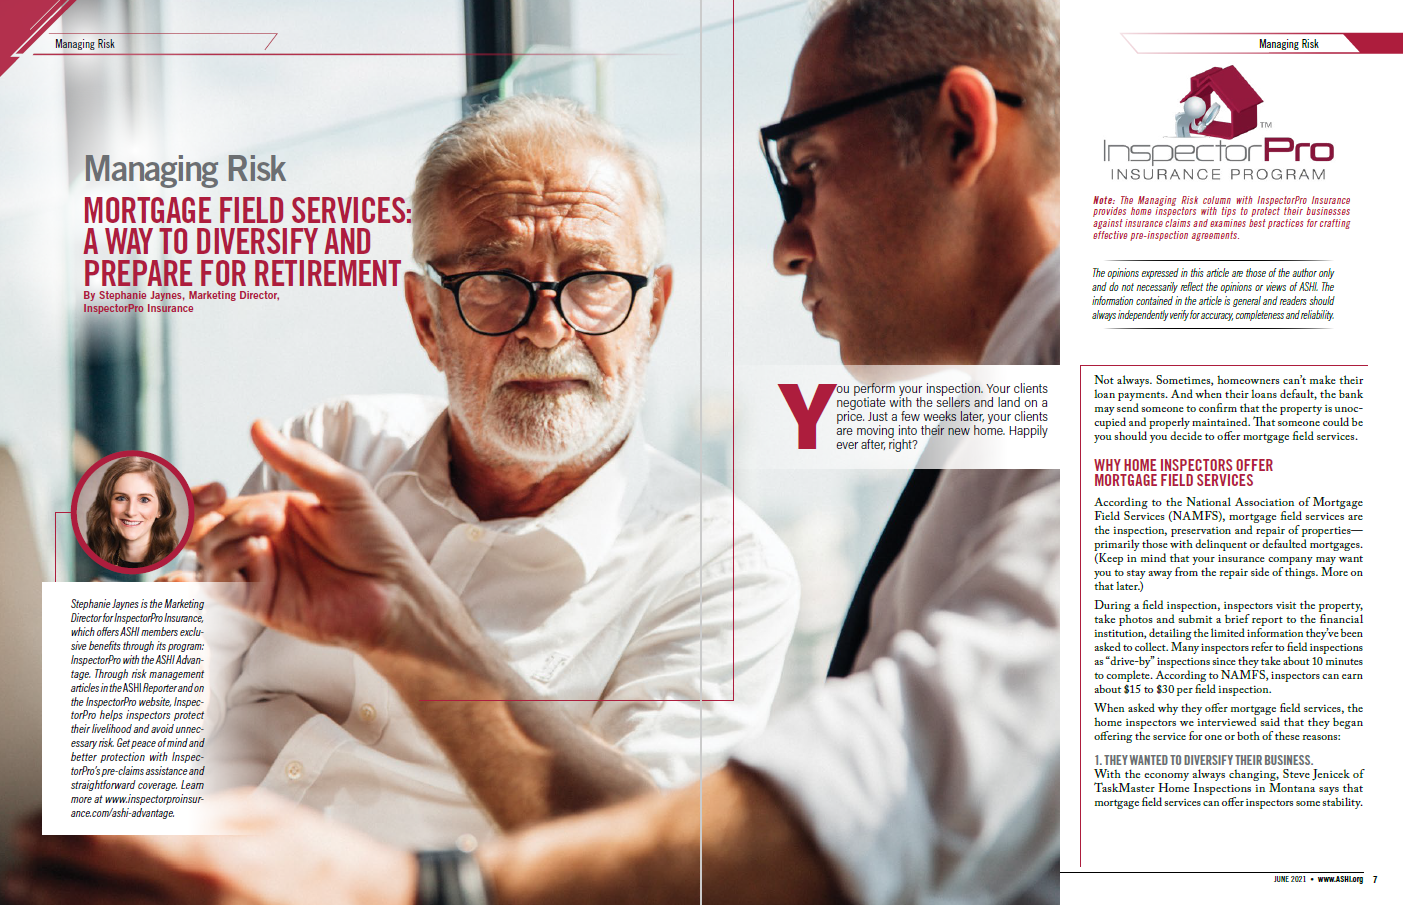 Picture of Mortgage Field Services article in a magazine